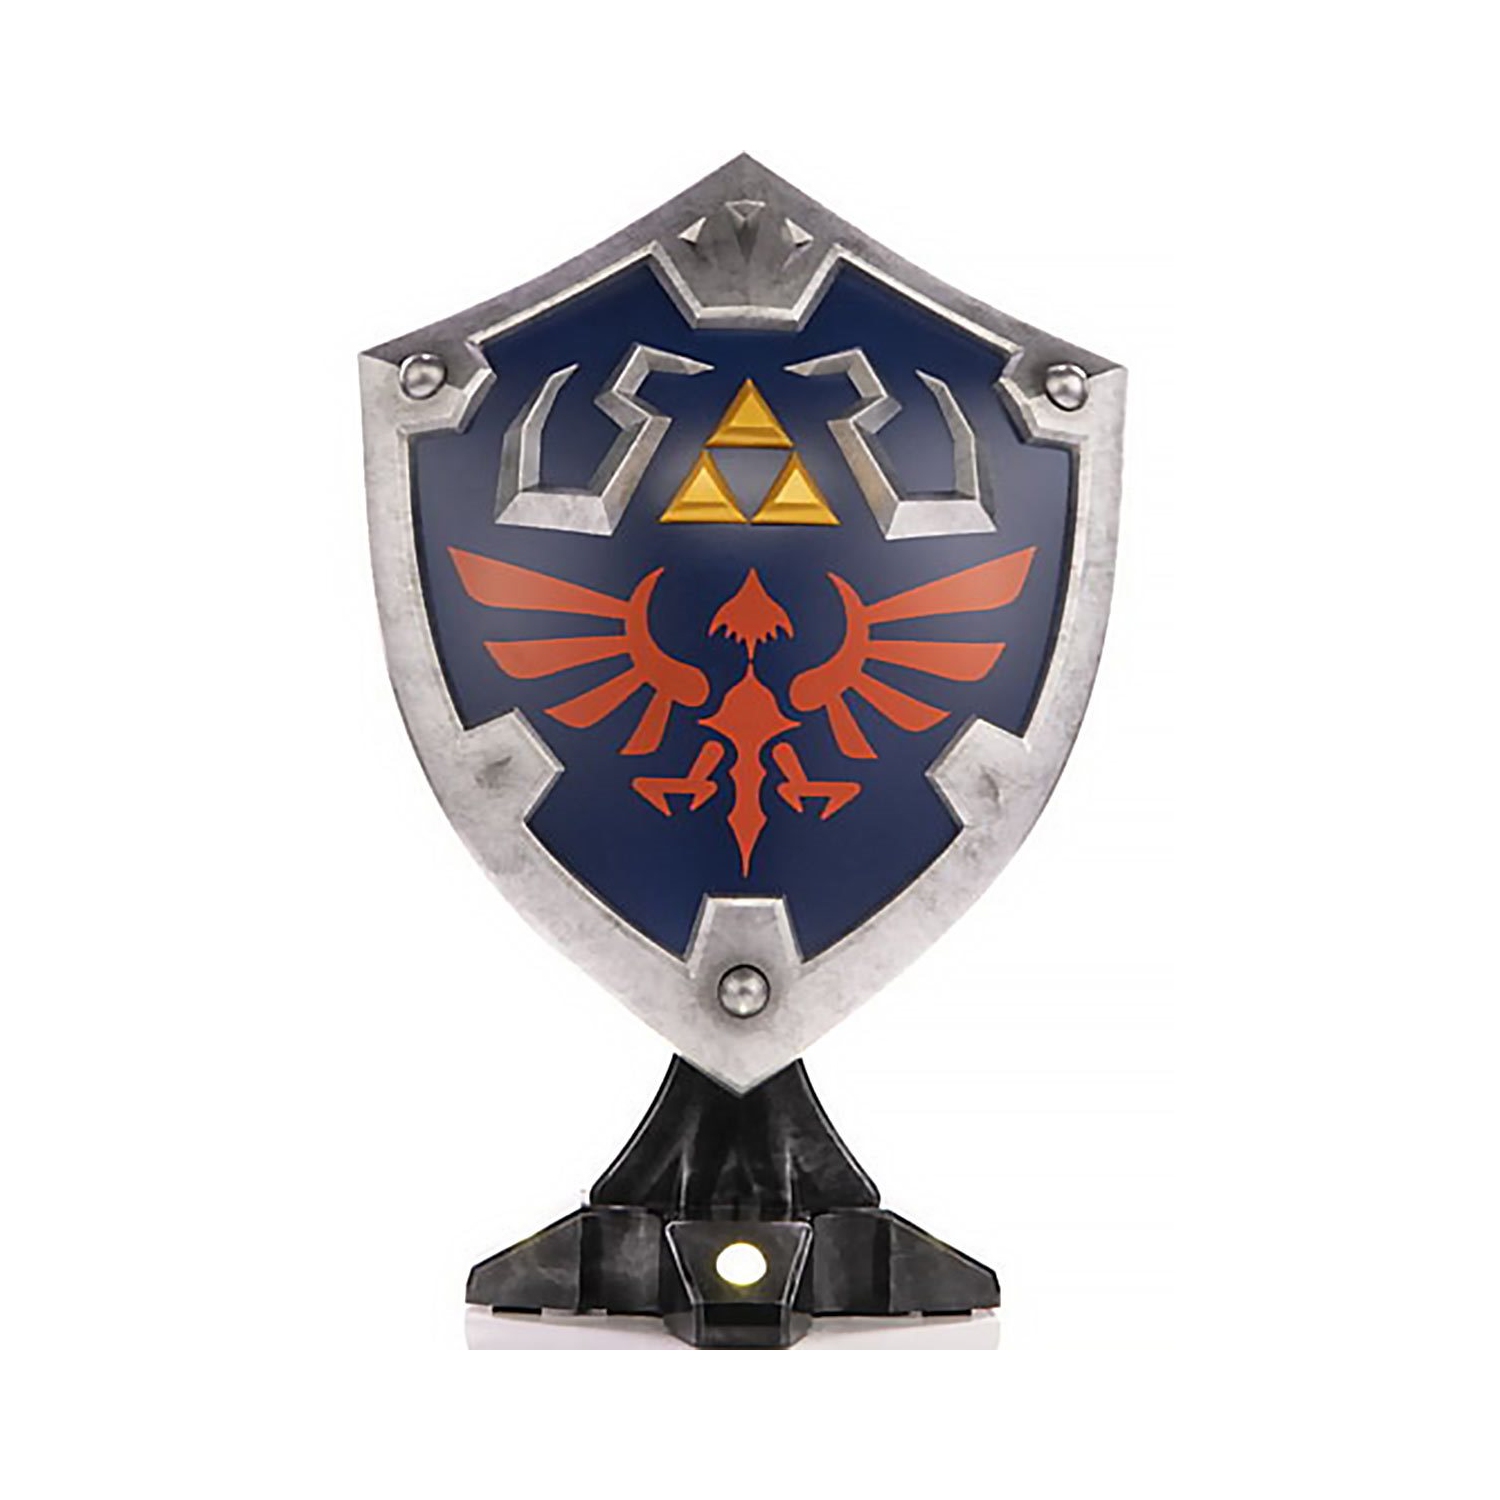 Hylian Shield Collector's Edition The Legend of Zelda: Breath of the Wild Statue